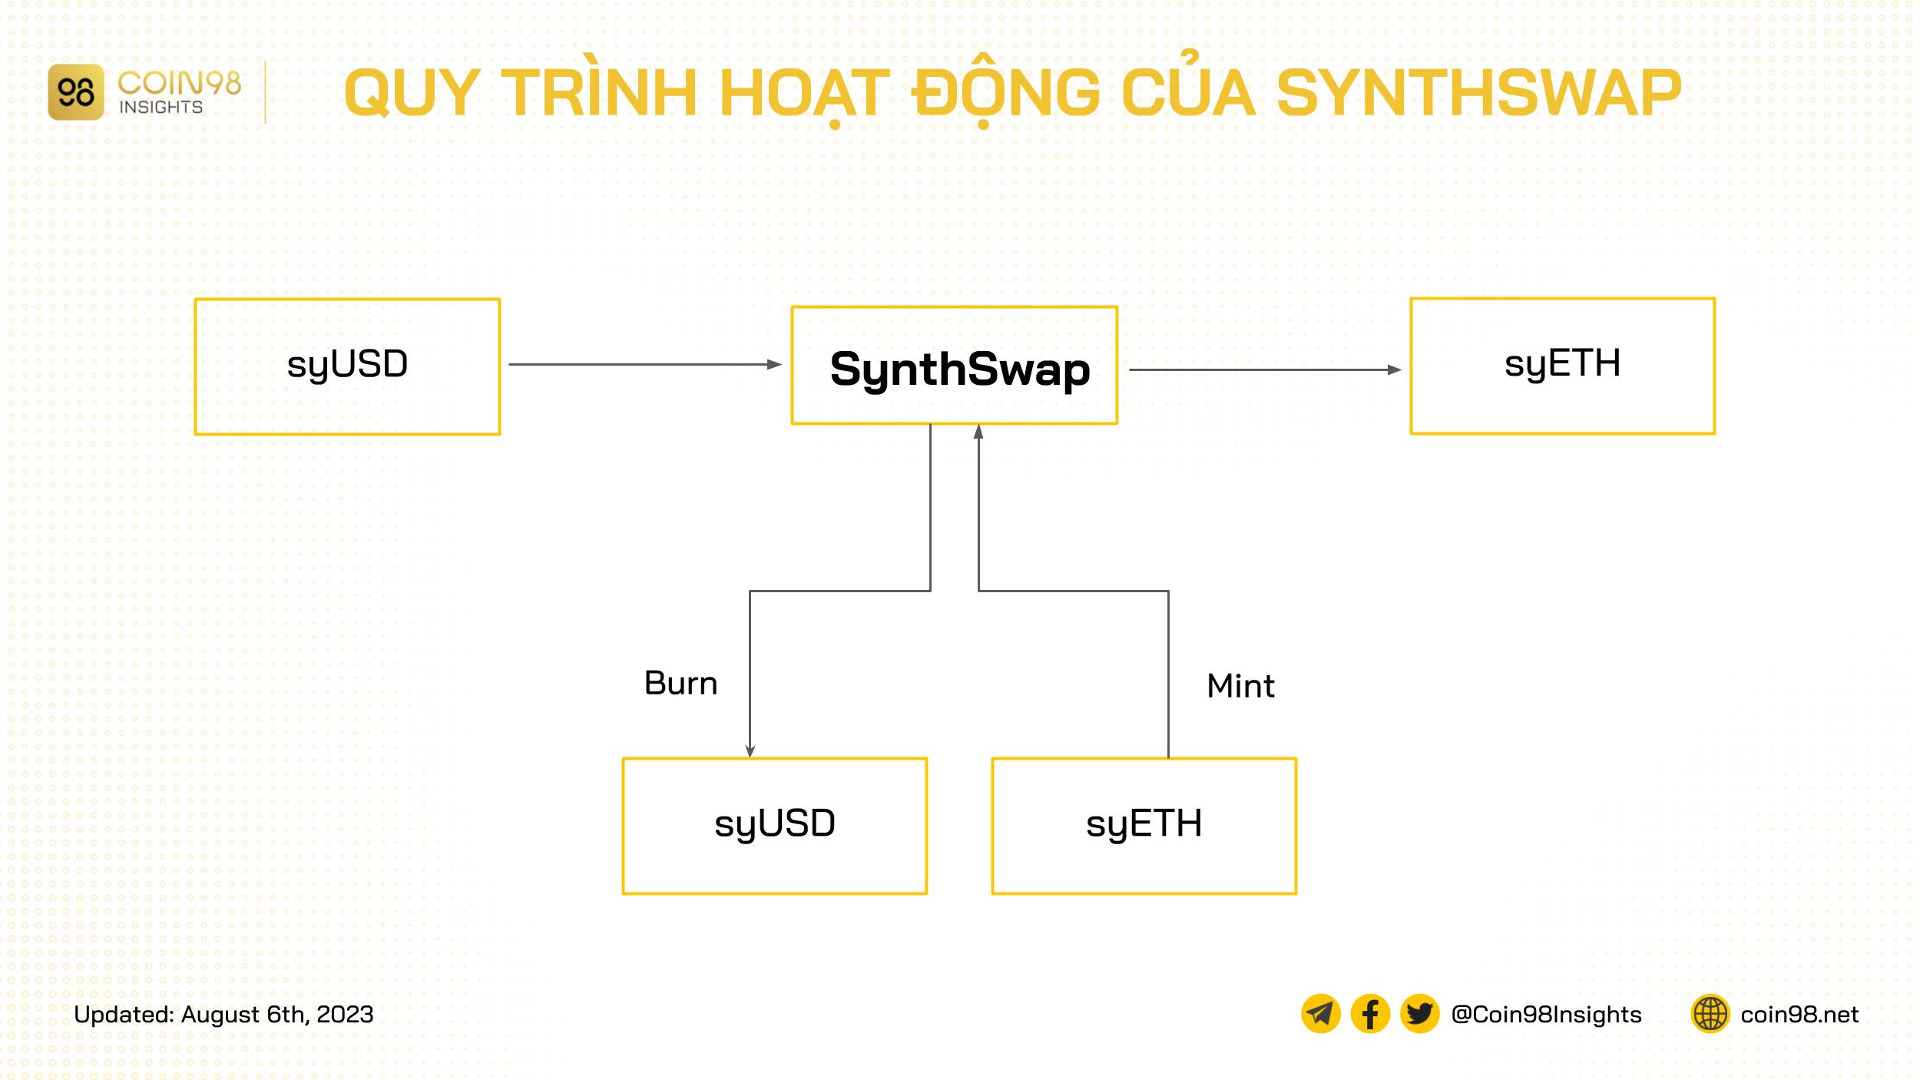 quy trinh hoat dong cua synthswap